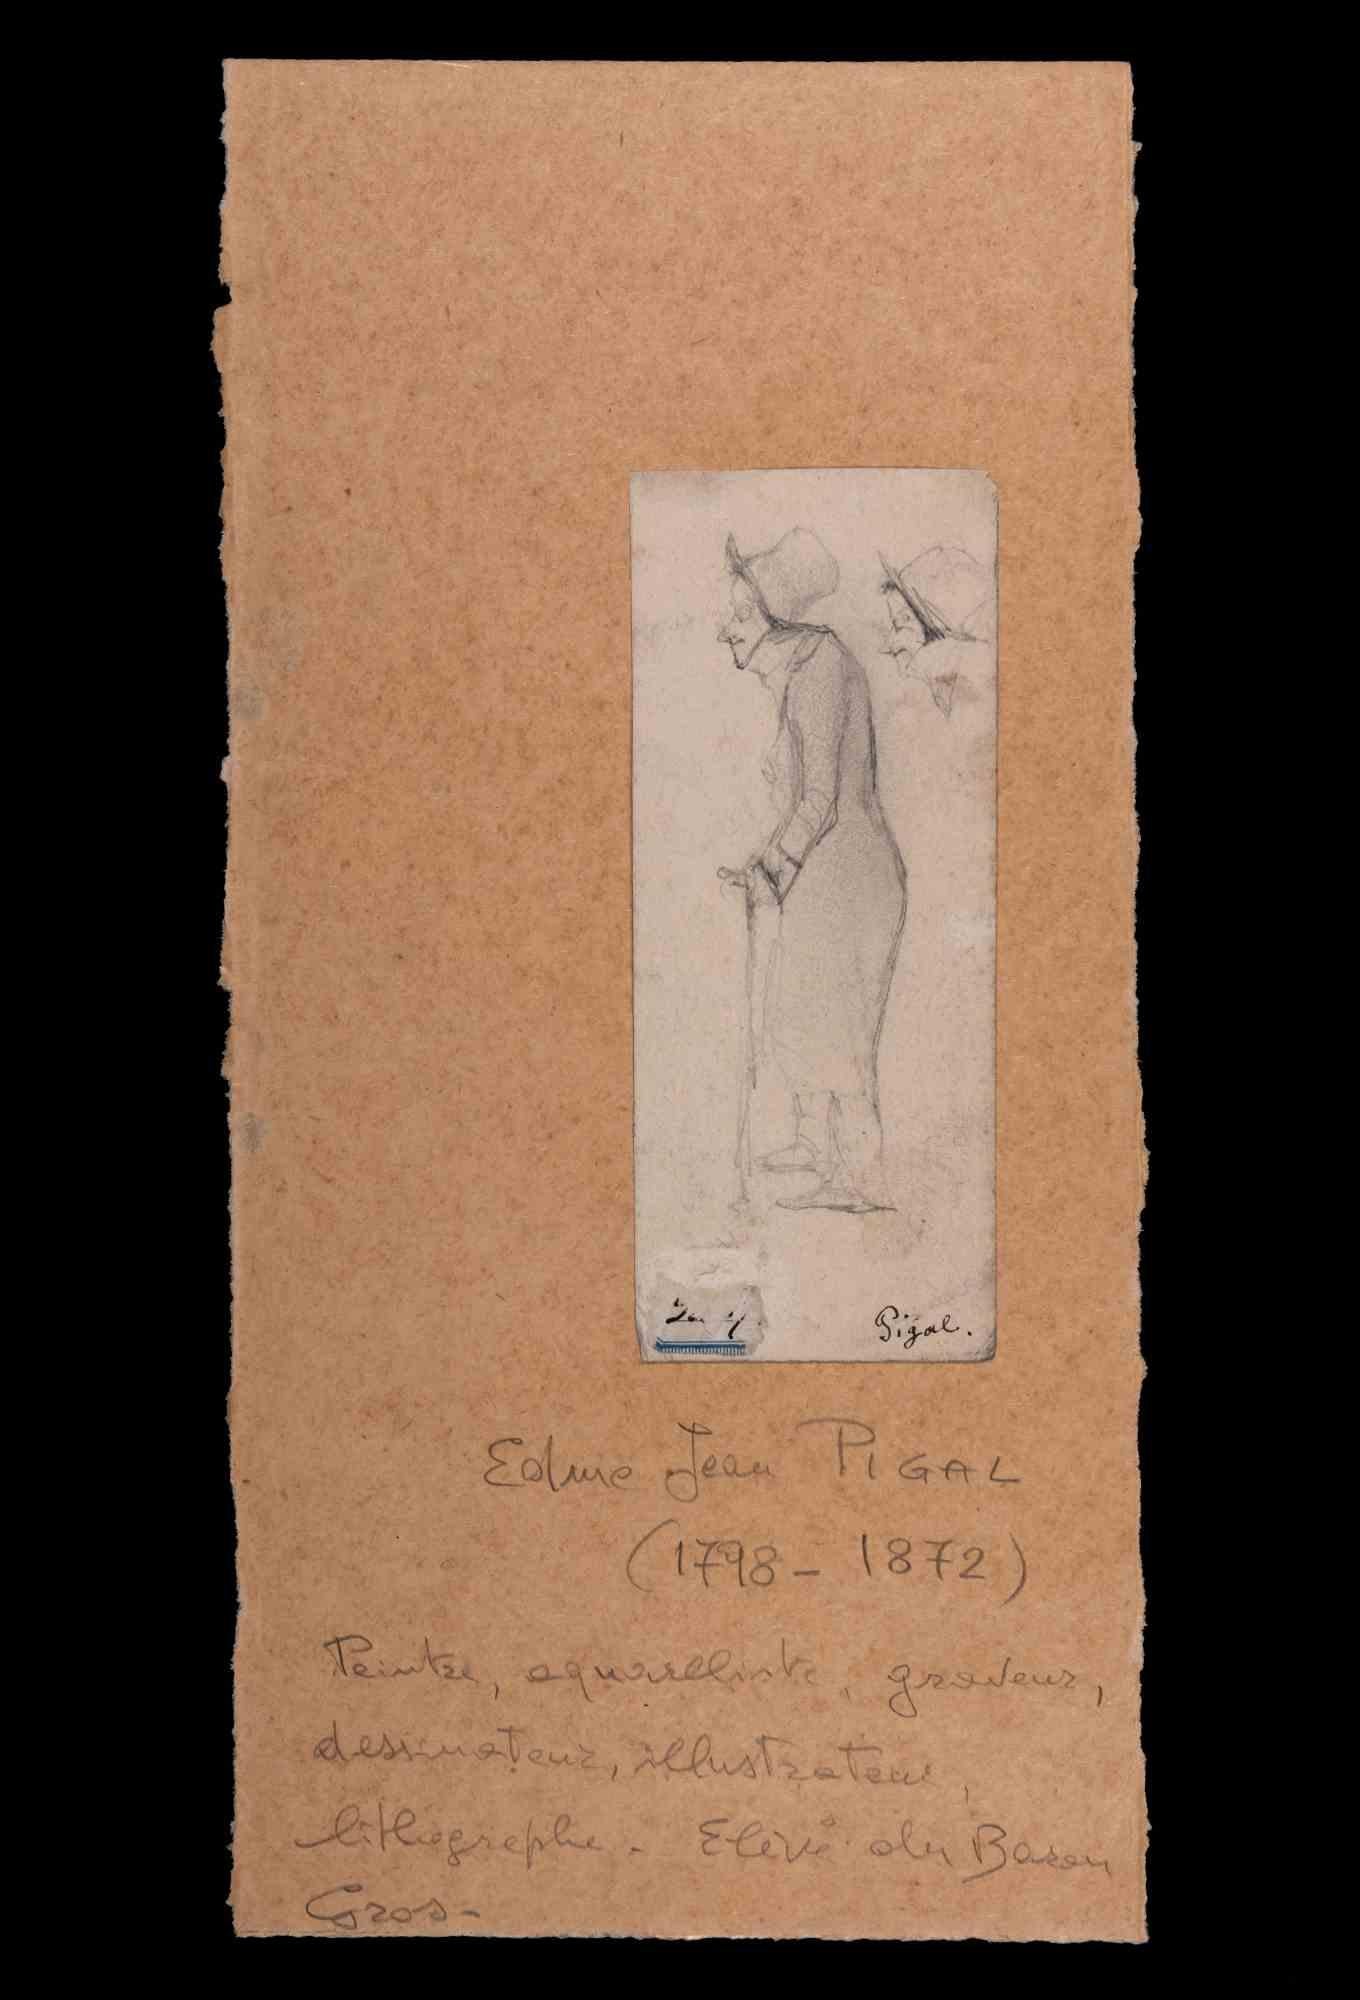 Old Lady is an Original Pencil Drawing realized by Edmé Jean Pigal (1798-1872).

The little artwork is in good condition.

Hand-signed by the artist on the lower right corner.

Edme-Jean Pigal , born in Paris , on February 2 , 1798 and died at Sens